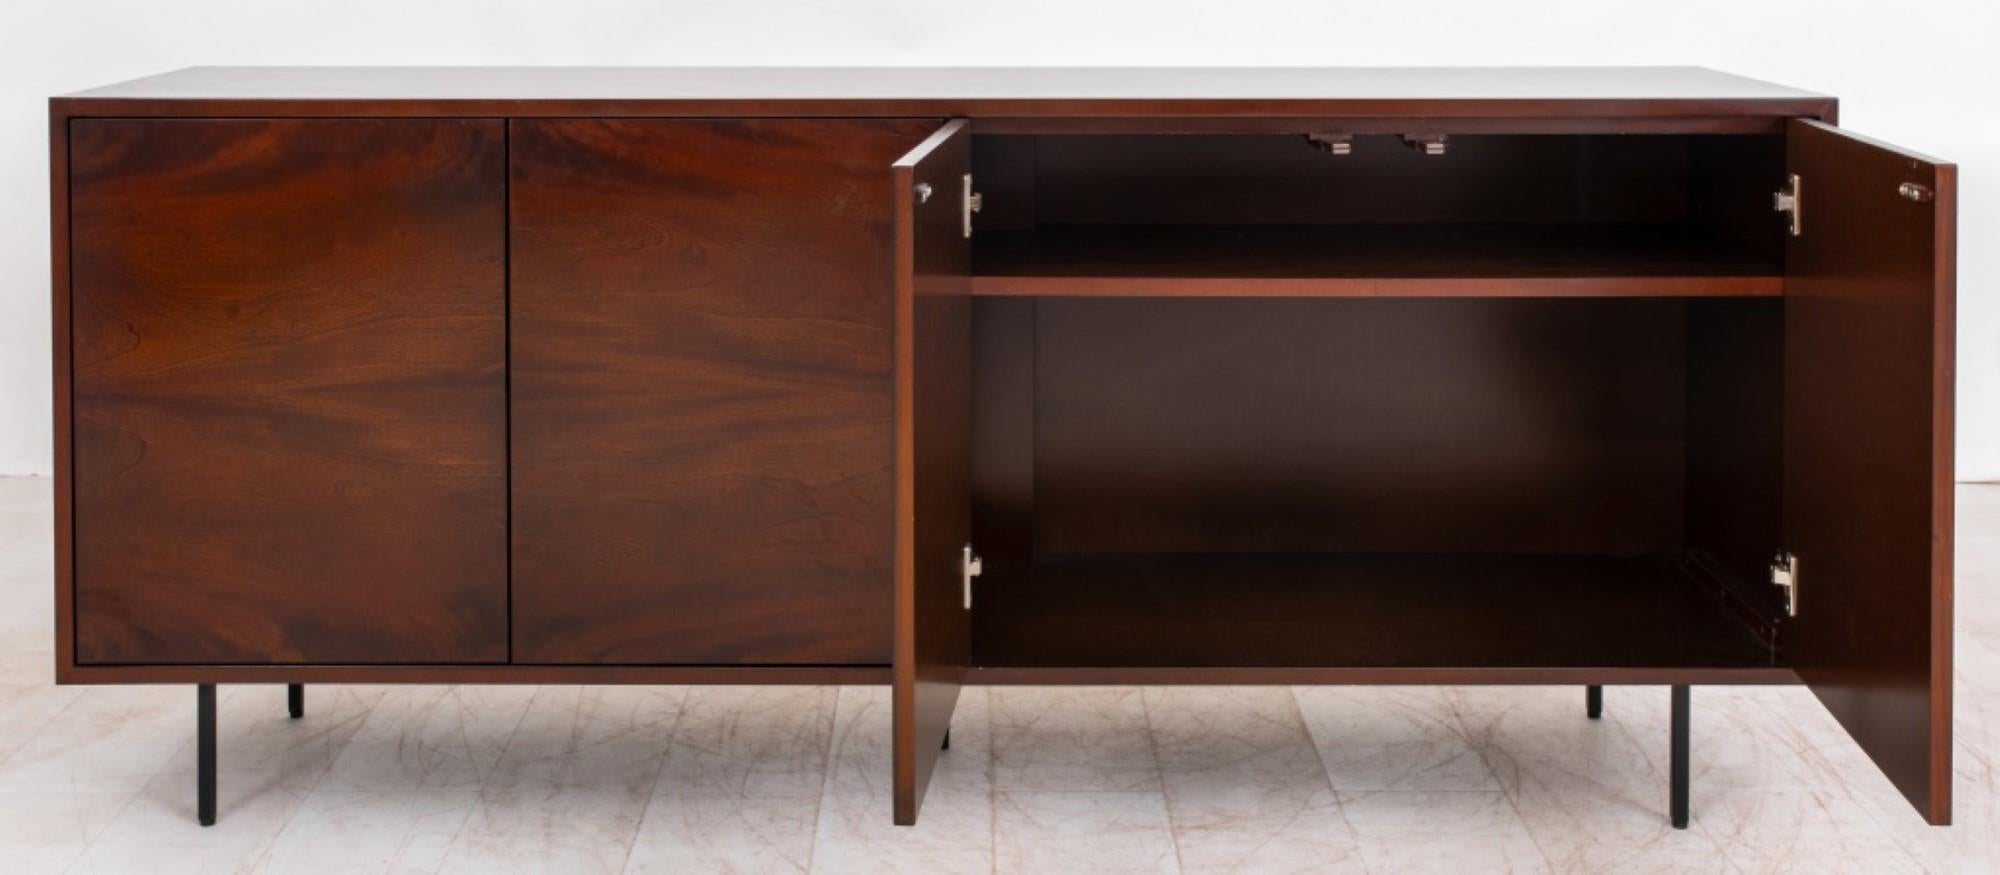 20th Century Mid-Century Modern Style Credenza Cabinet For Sale